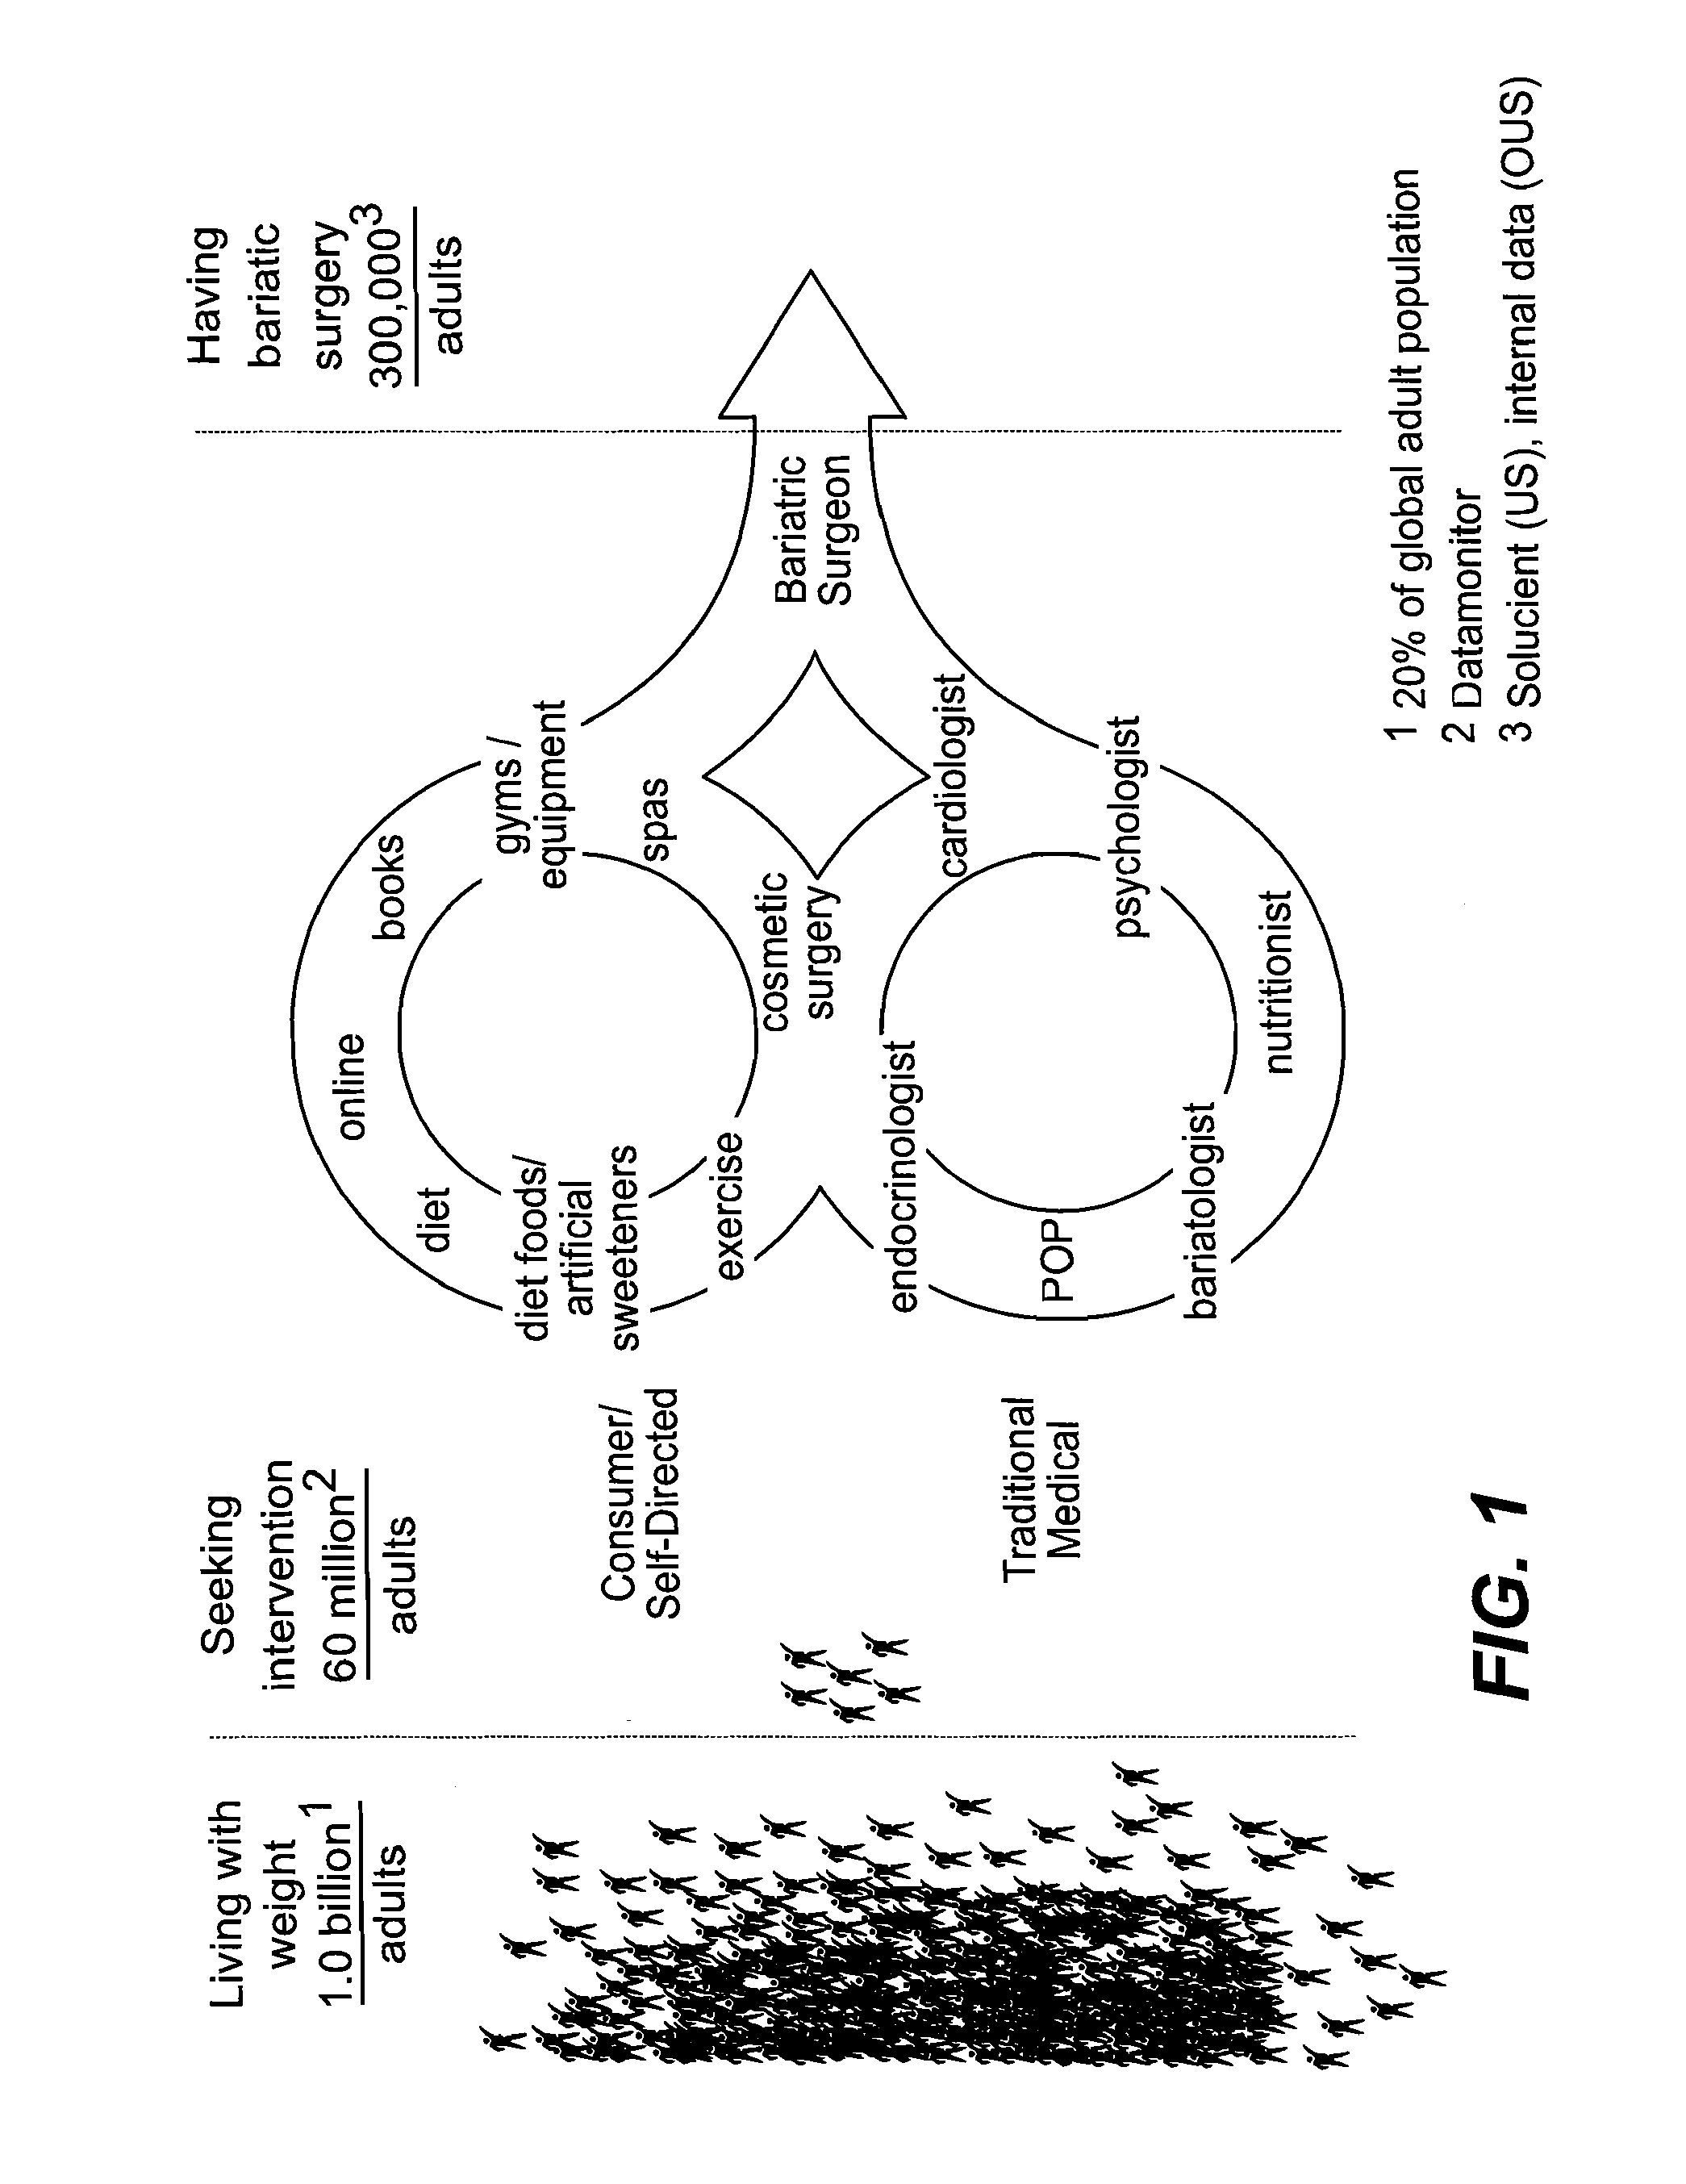 Method and Apparatus of Assessing Need for Health Care and Facilitating The Provision of Health Care